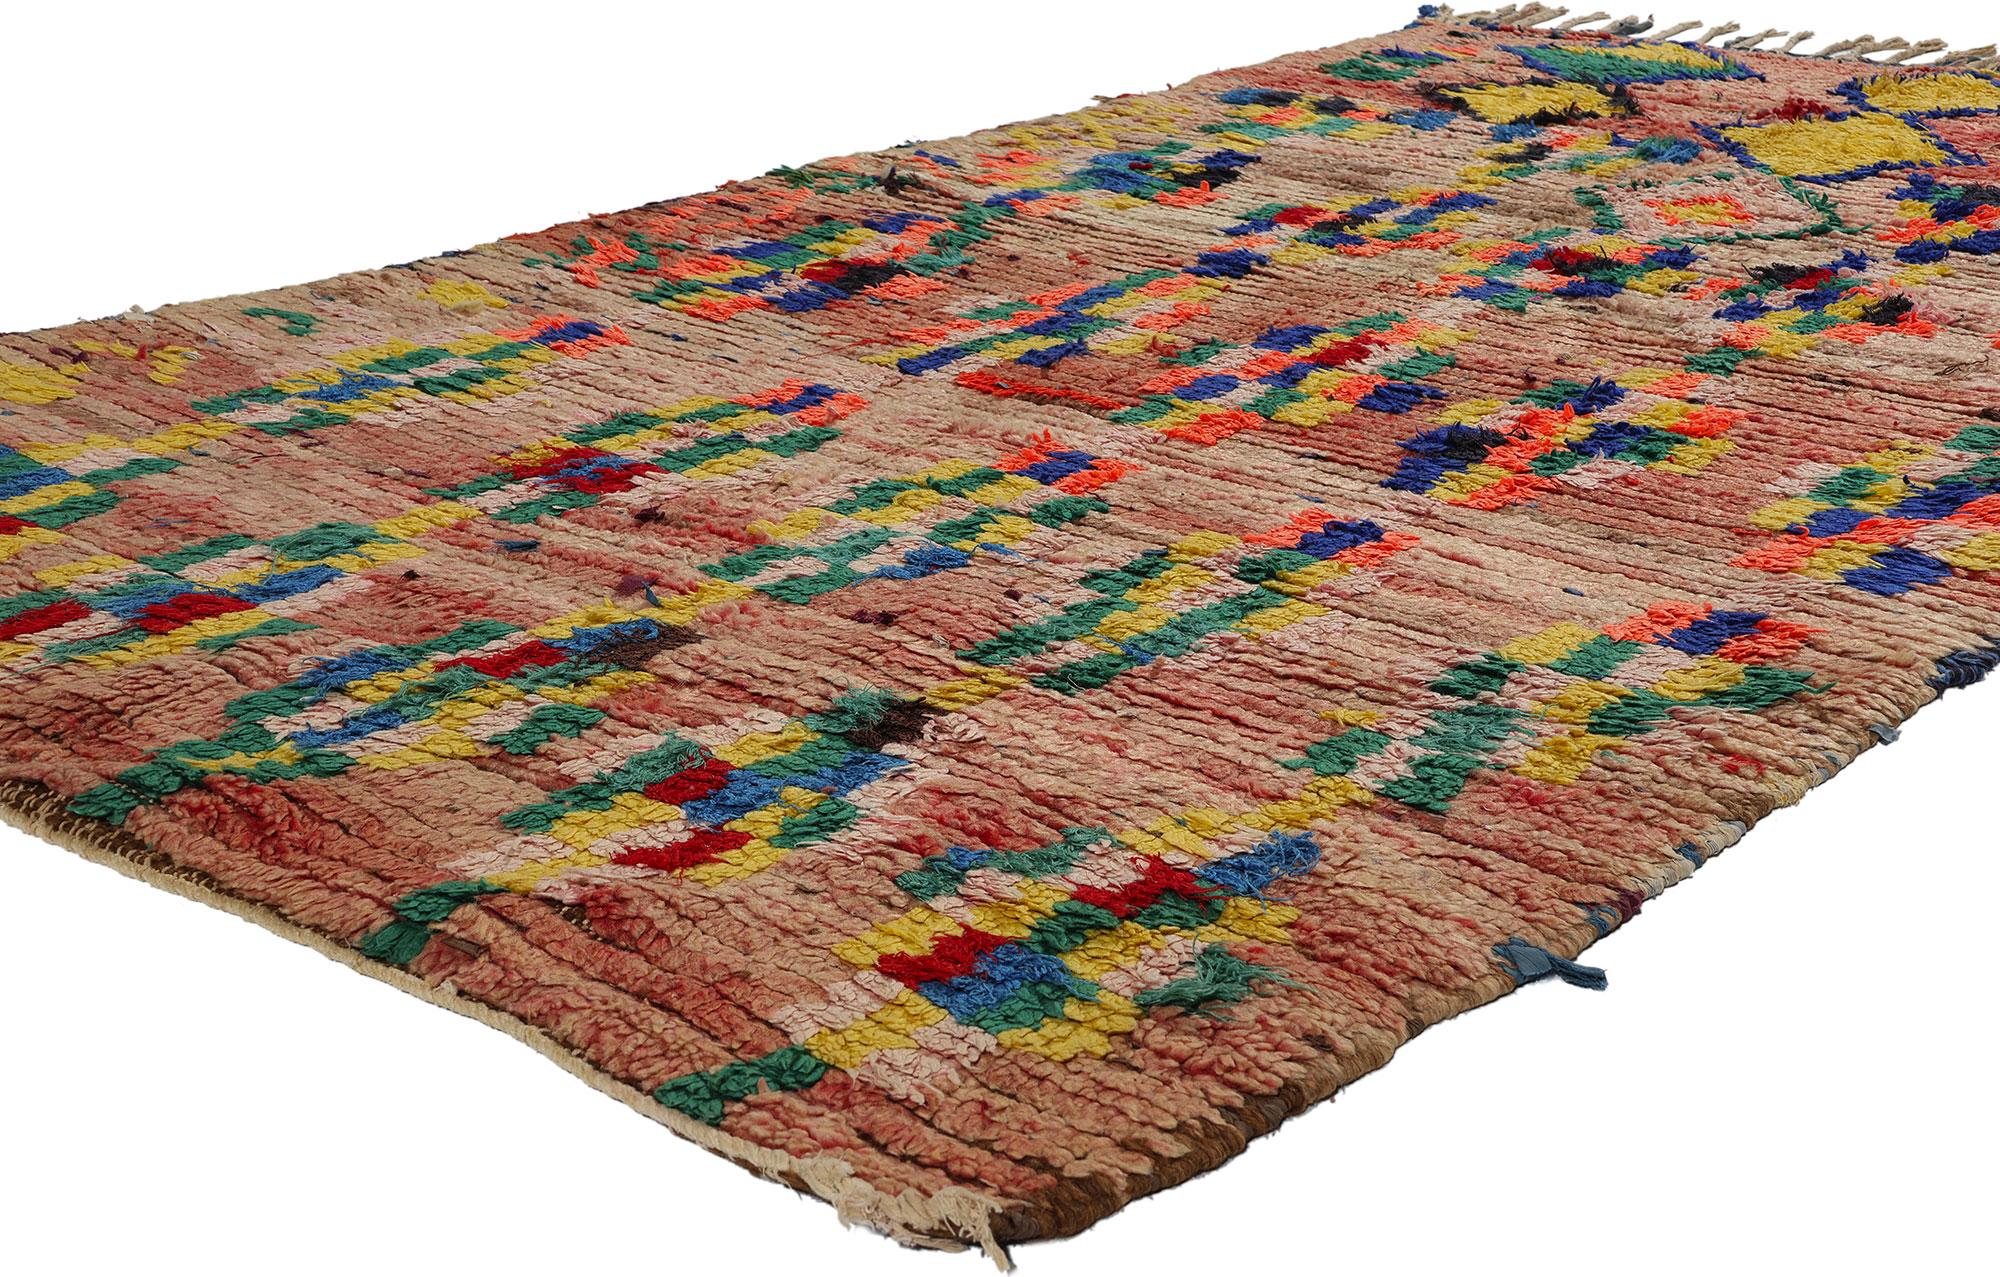 21797 Colorful Vintage Moroccan Azilal Rug, 04'03 x 08'01. Delve into the opulent heritage of Azilal rugs unfurling from the dynamic core of the provincial capital in central Morocco, securely nestled within the High Atlas Mountains. Celebrated for